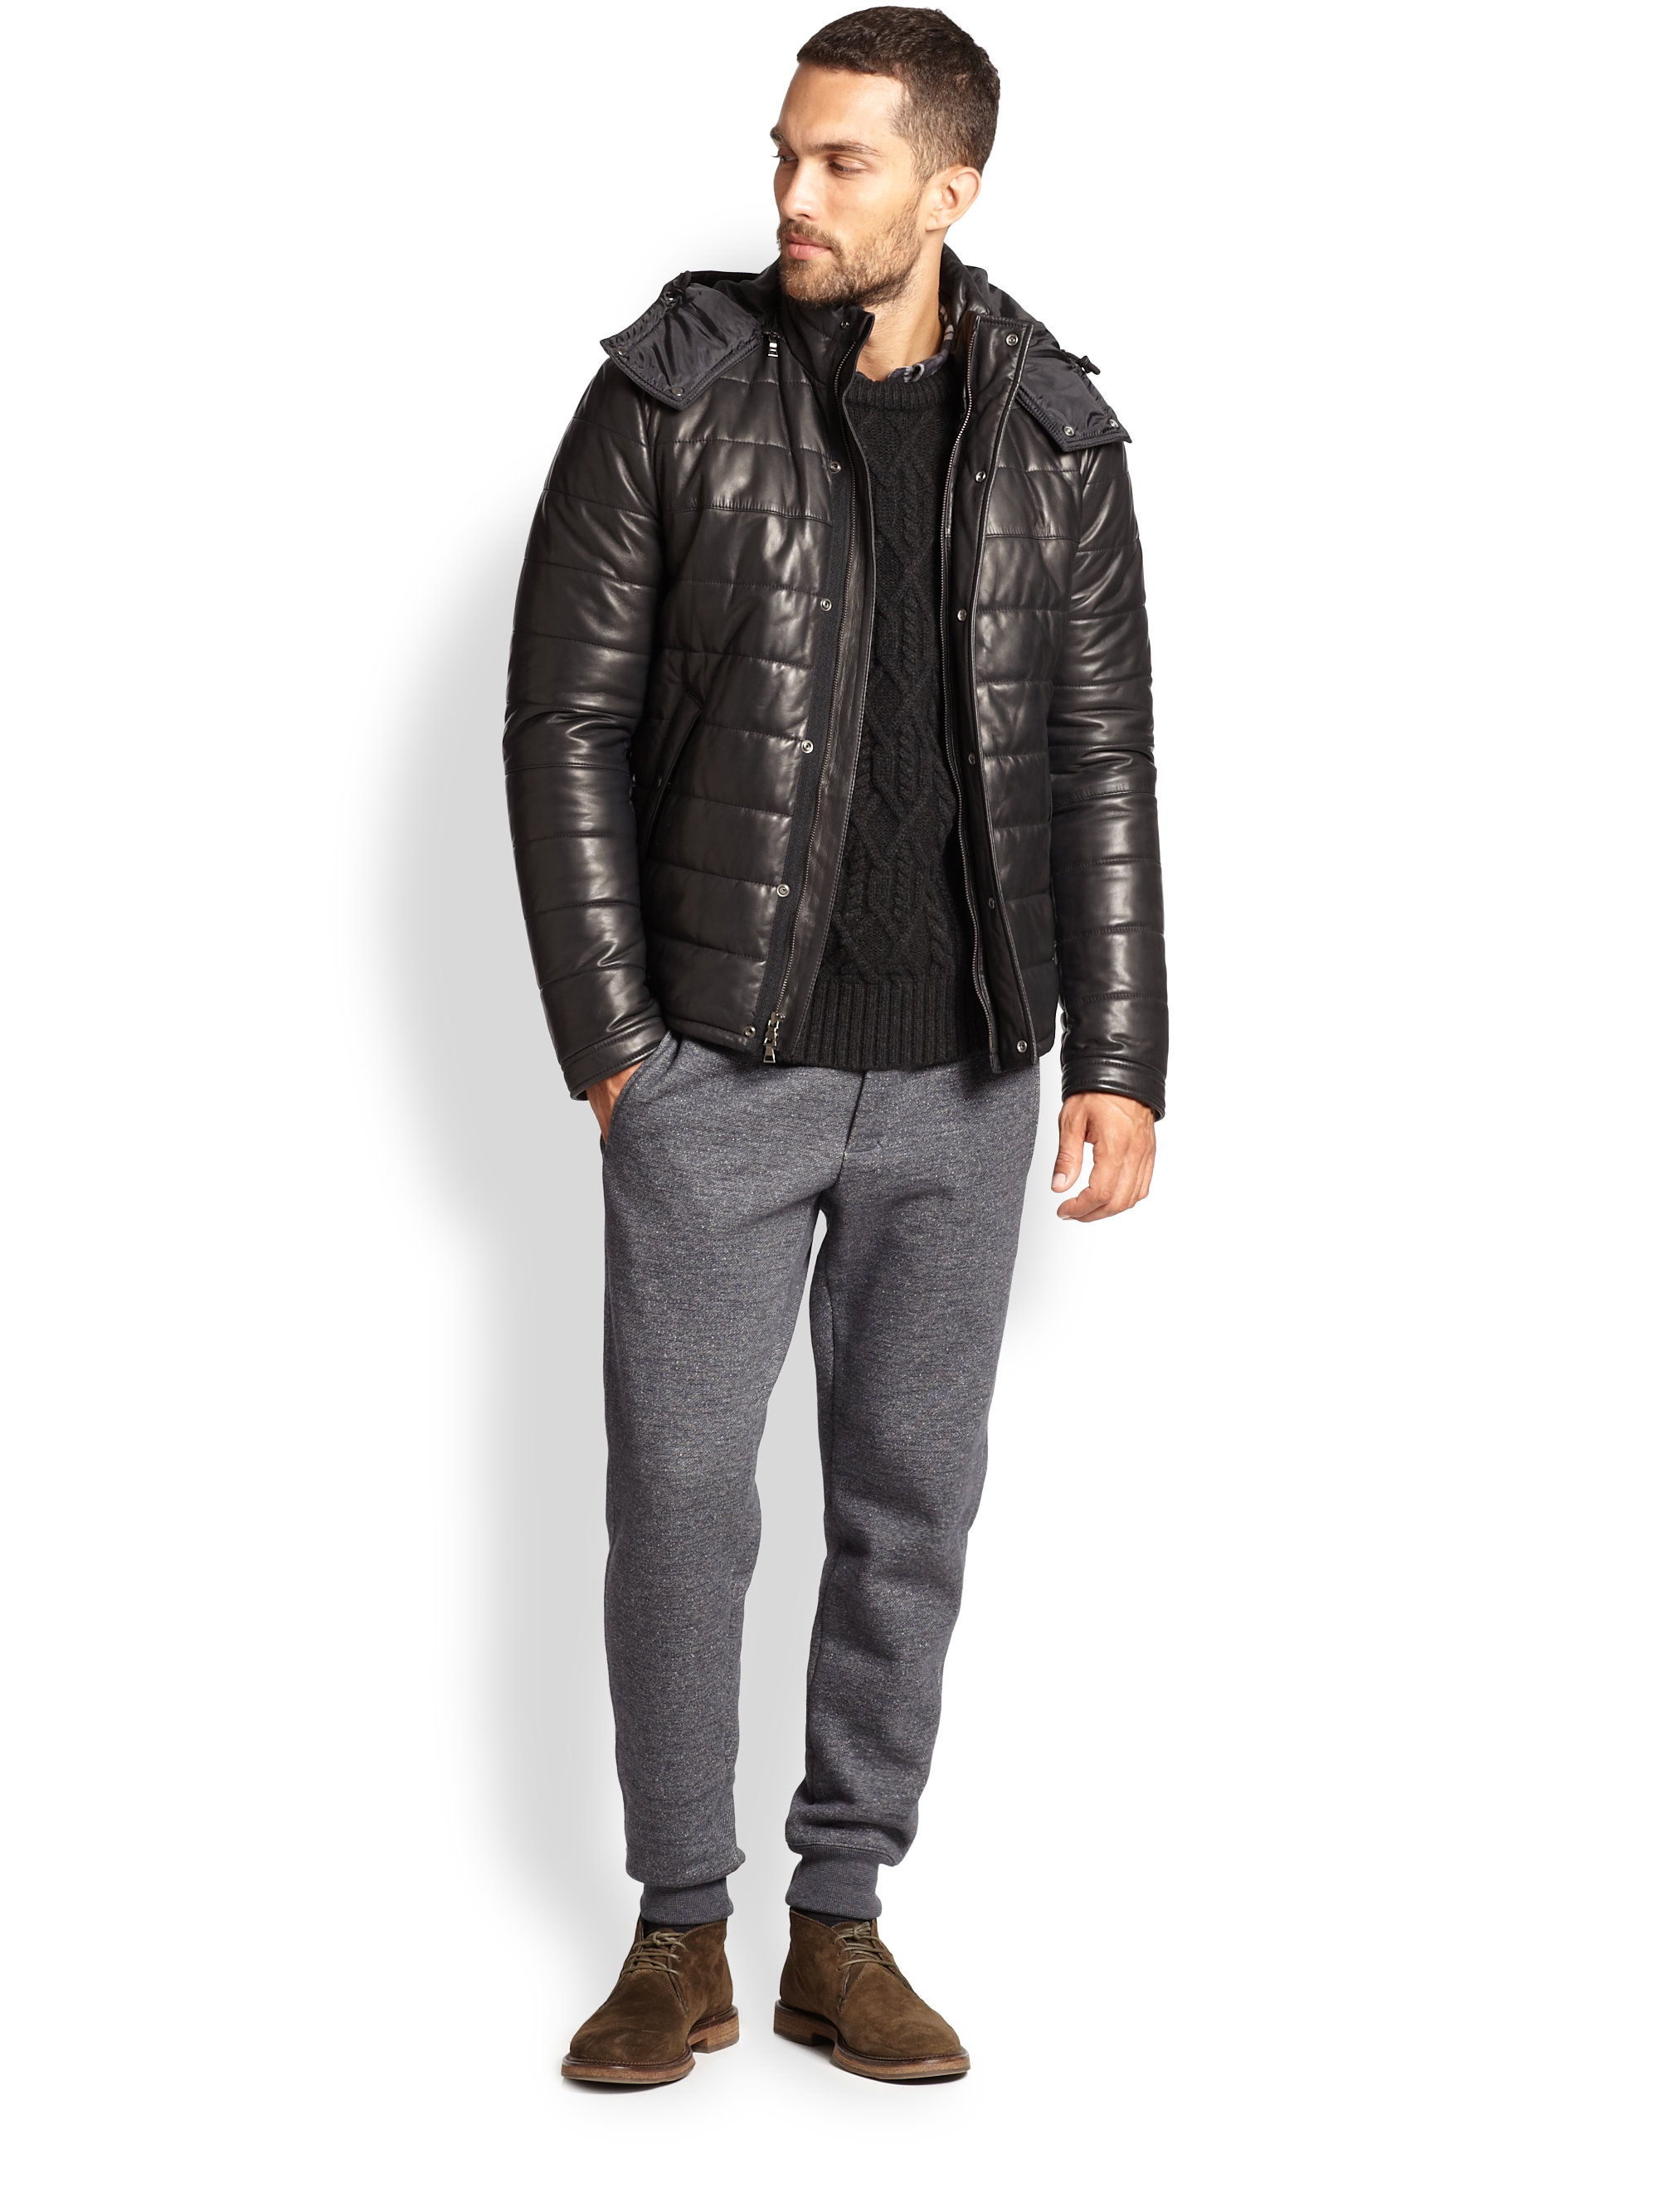 Vince Quilted Leather Puffer Jacket in Black for Men - Lyst